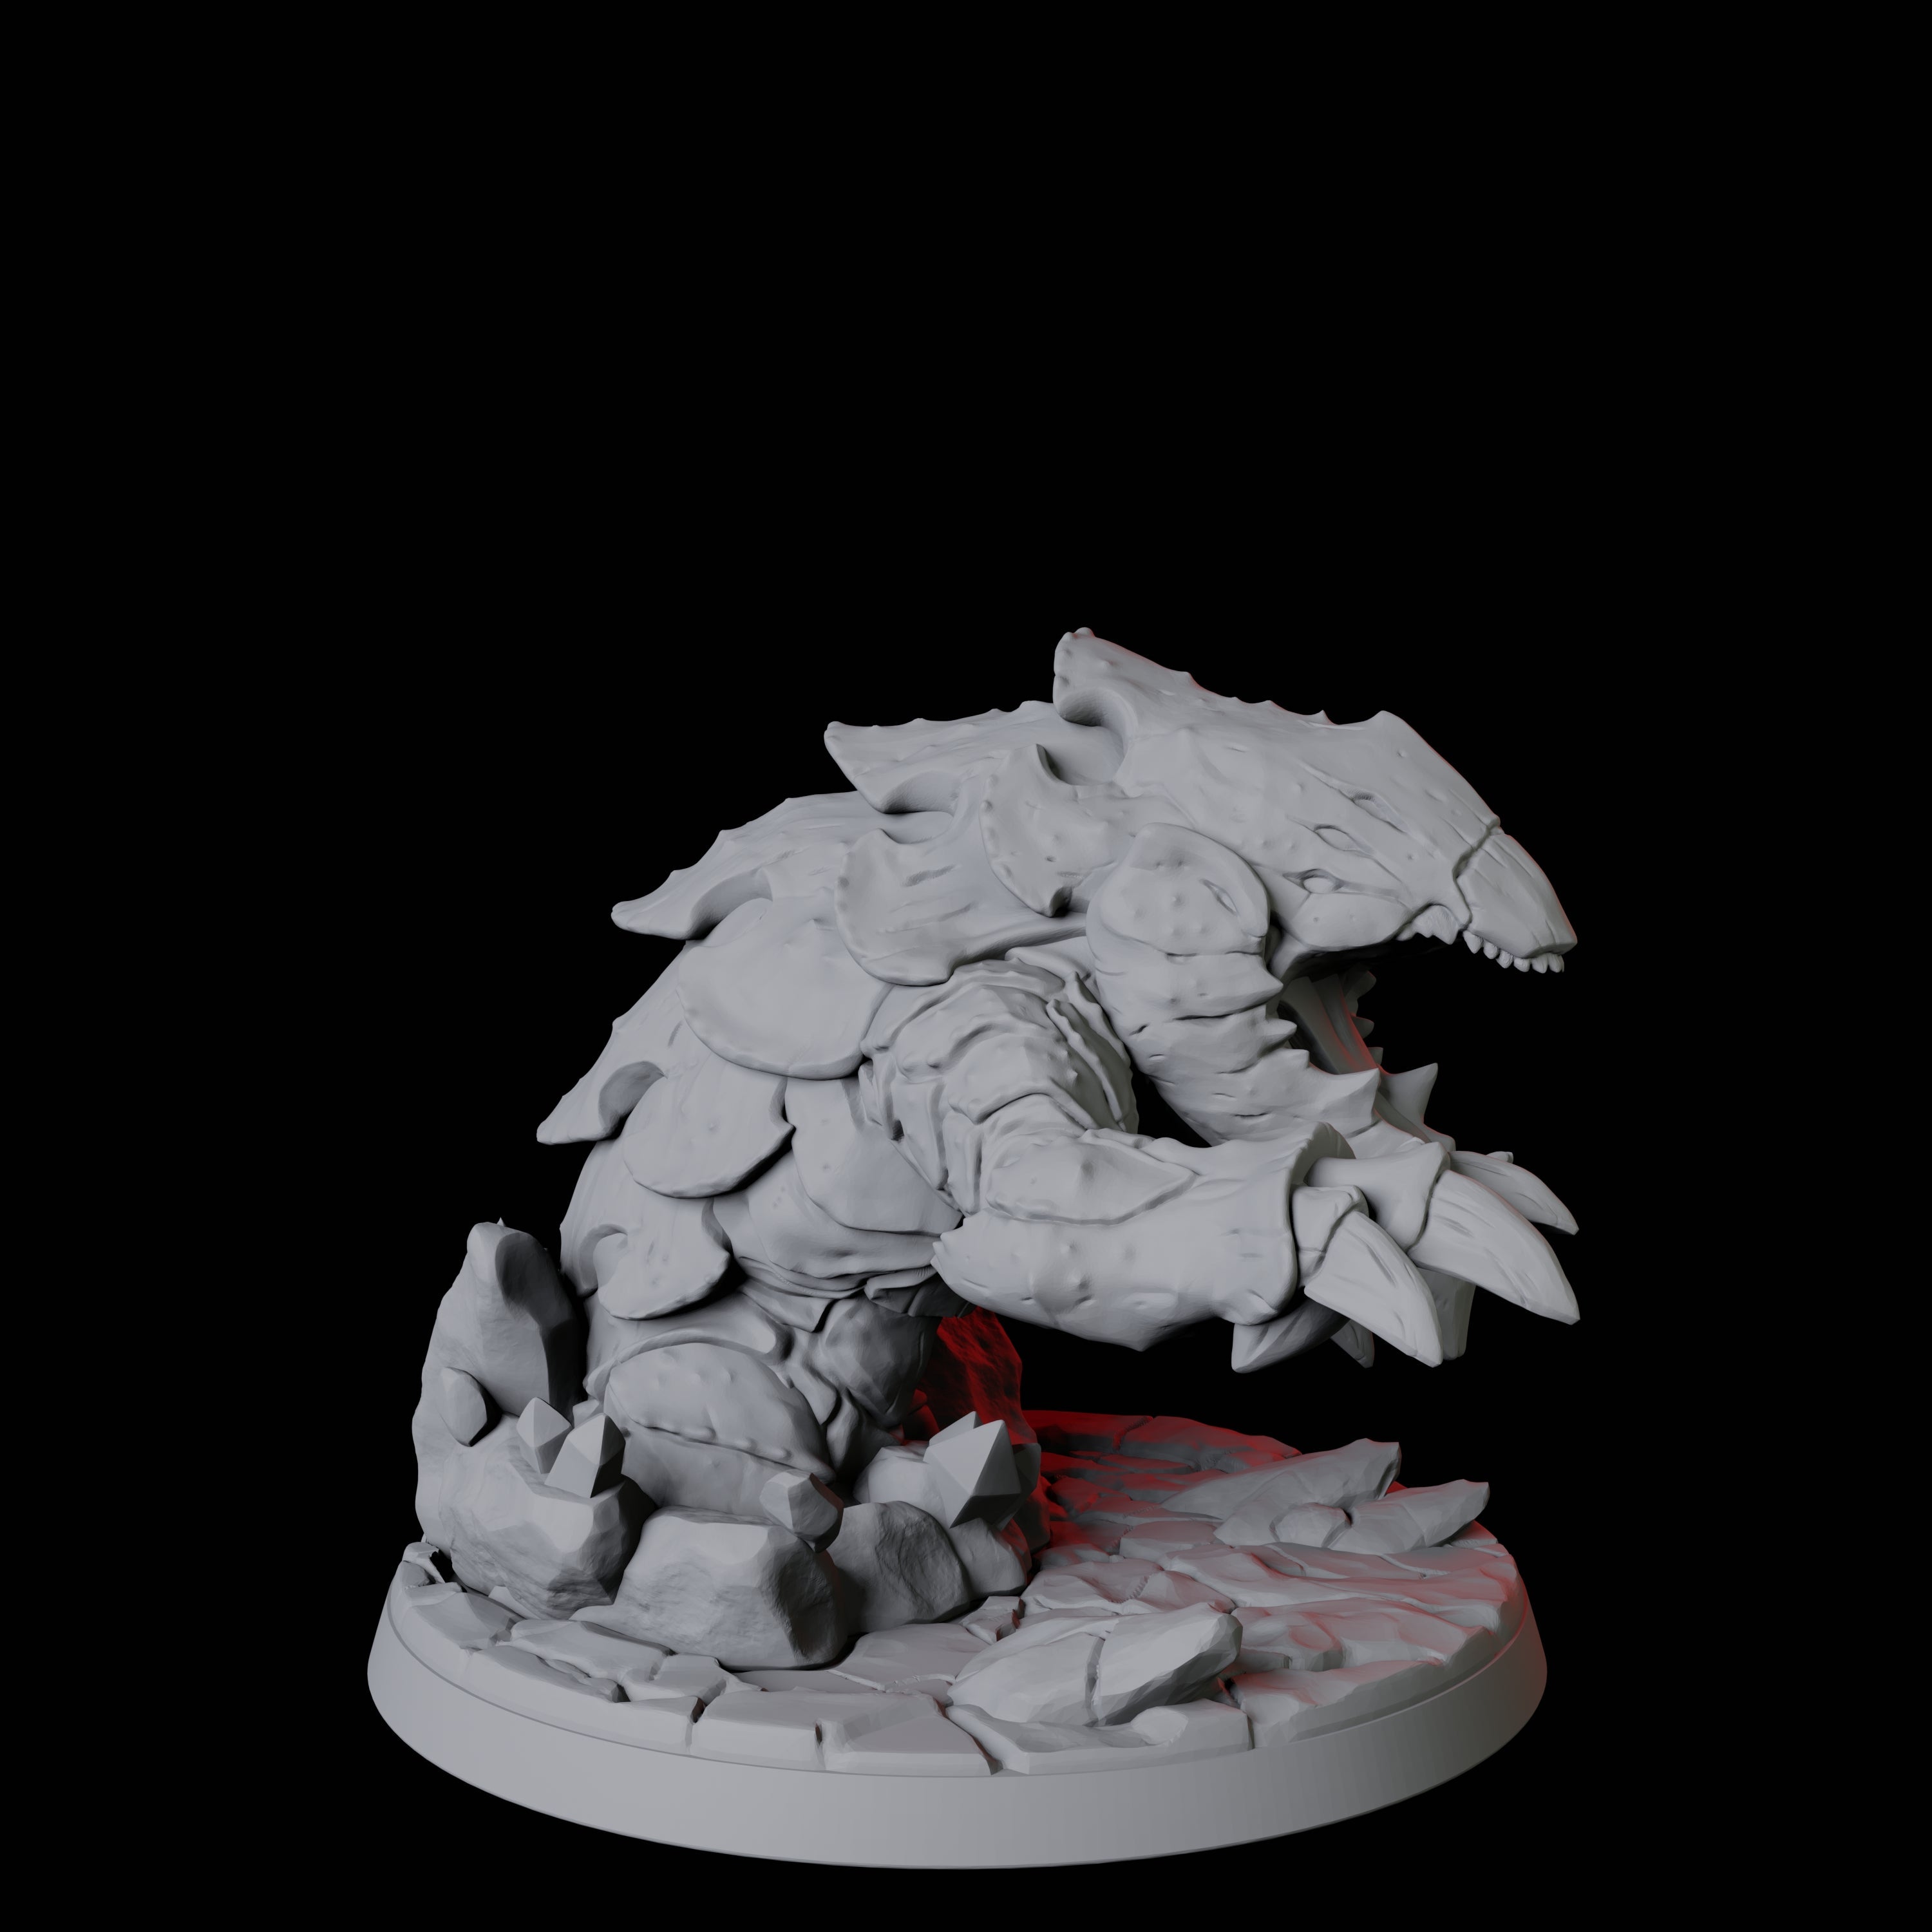 Burrowing Bulette C Miniature for Dungeons and Dragons, Pathfinder or other TTRPGs